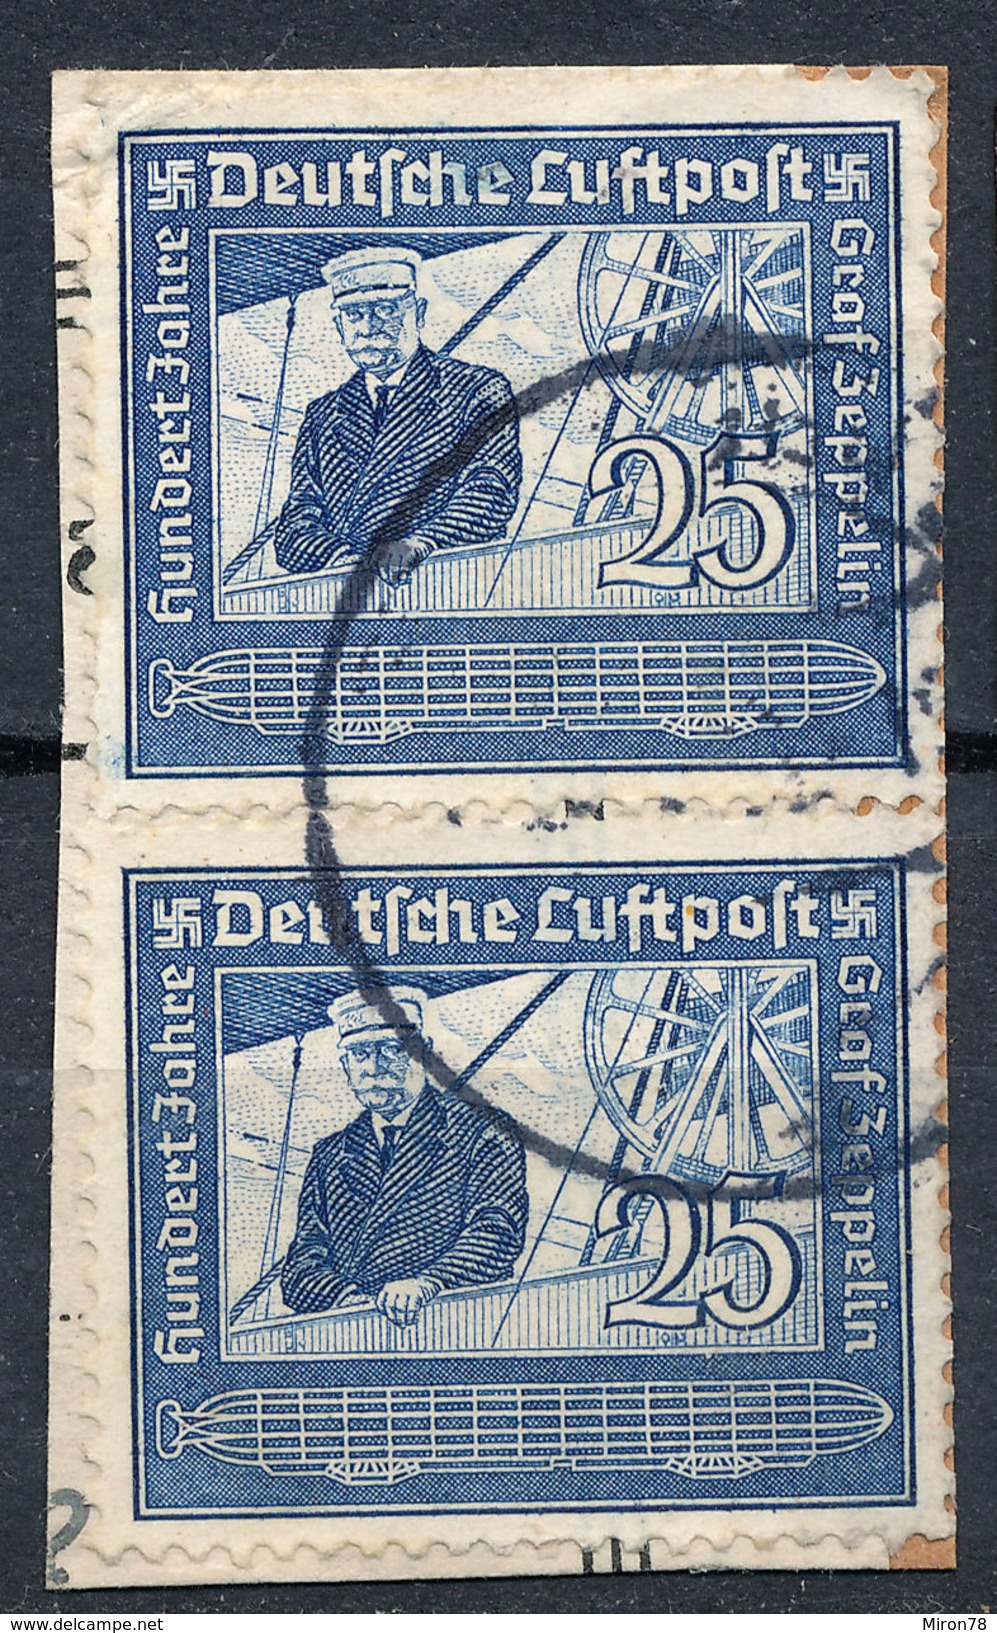 Stamp Germany Airmail Zeppelin 1938 Used Lot#7 - Airmail & Zeppelin